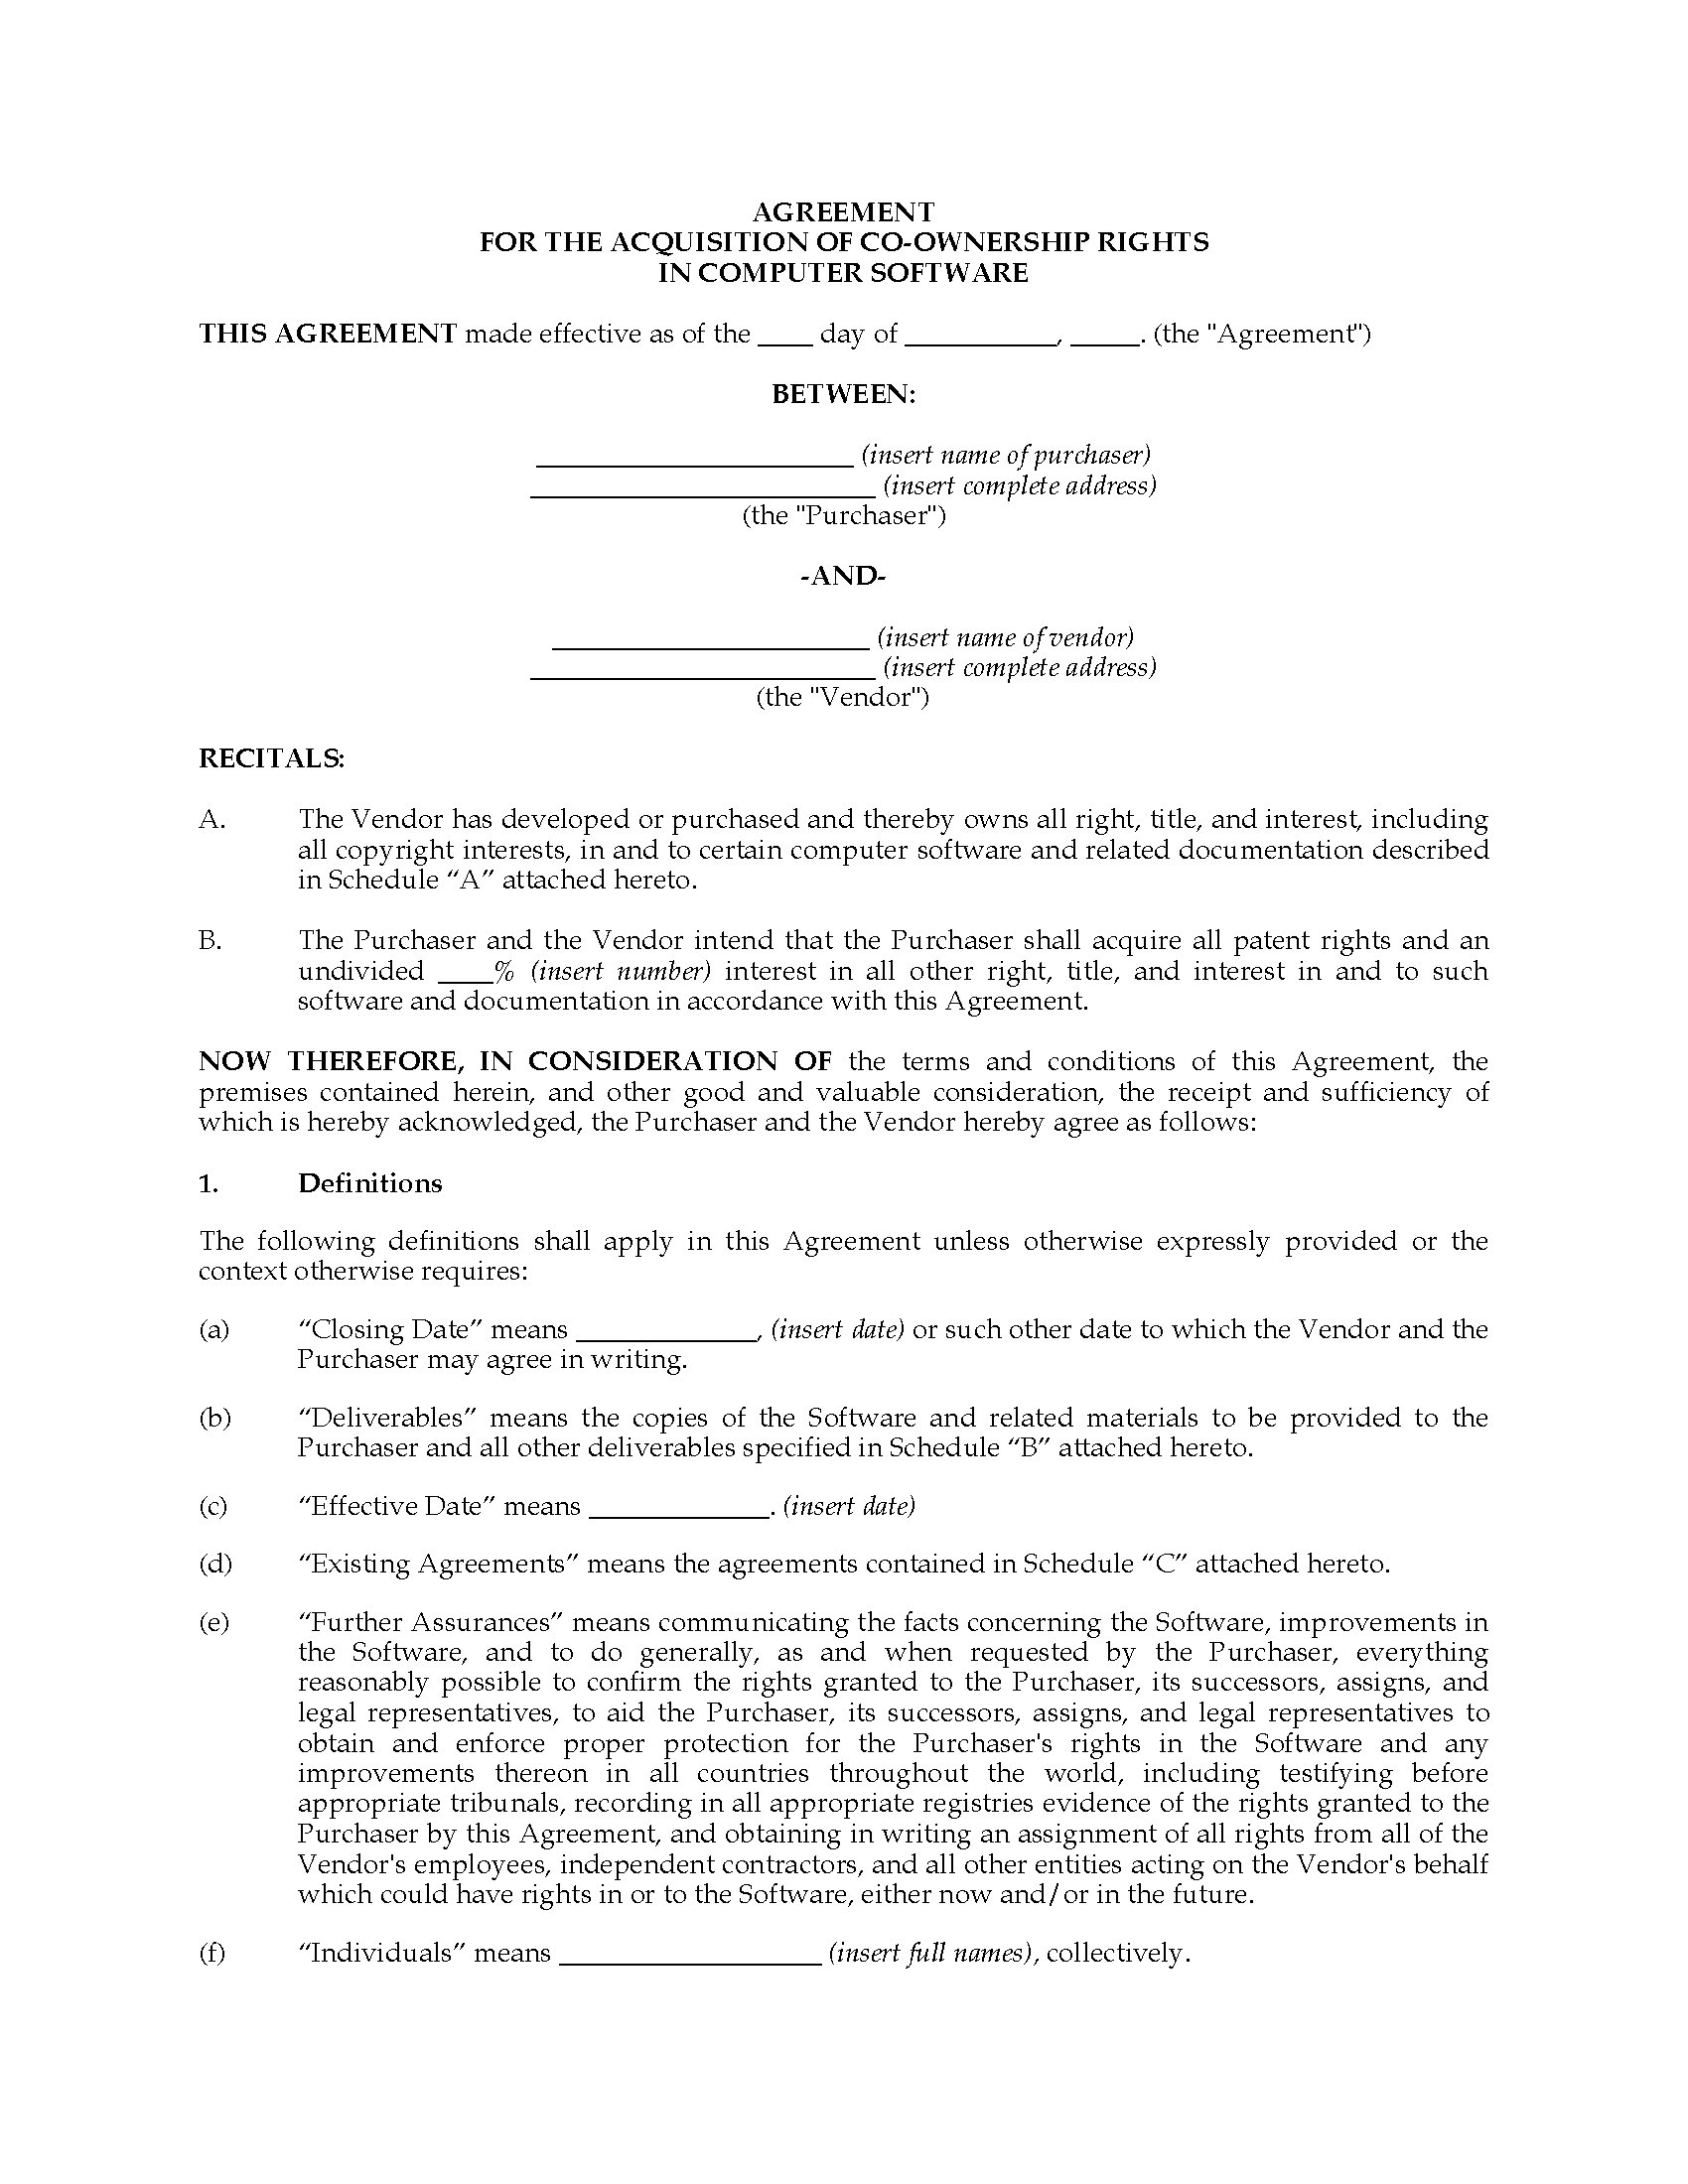 Software Agreement Contract Acquisition Agreement For Co Ownership Of Software Canada